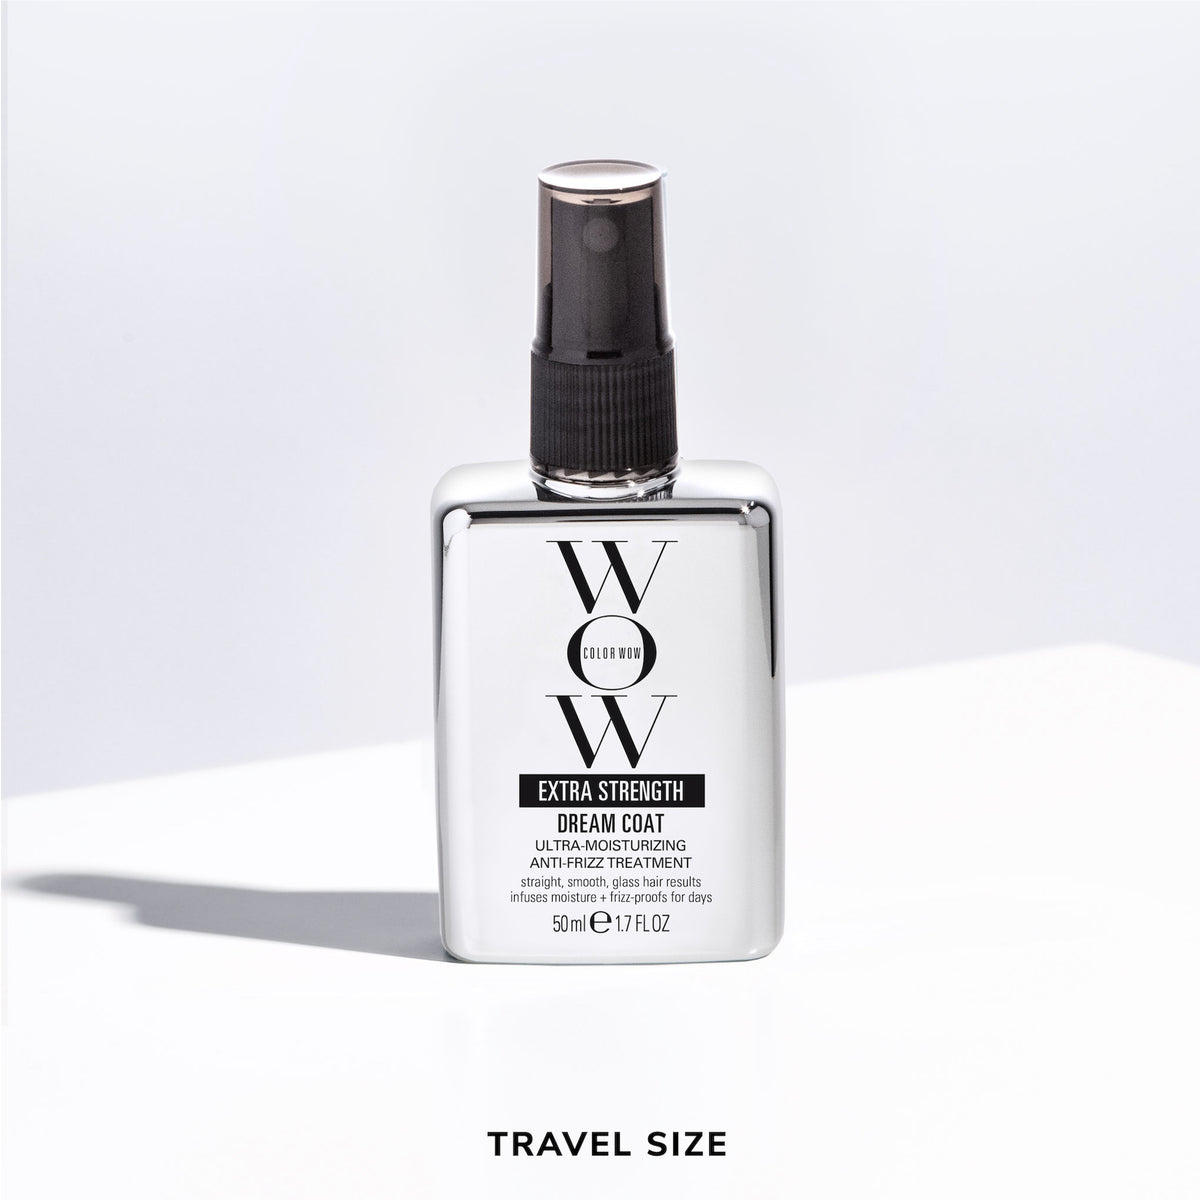  COLOR WOW Best Vacay Hair Ever Travel Kit Includes Shampoo,  Conditioner, Dream Coat, Style on Steroids, and Pop + Lock. These key  essentials are exactly what you need to fix frizz